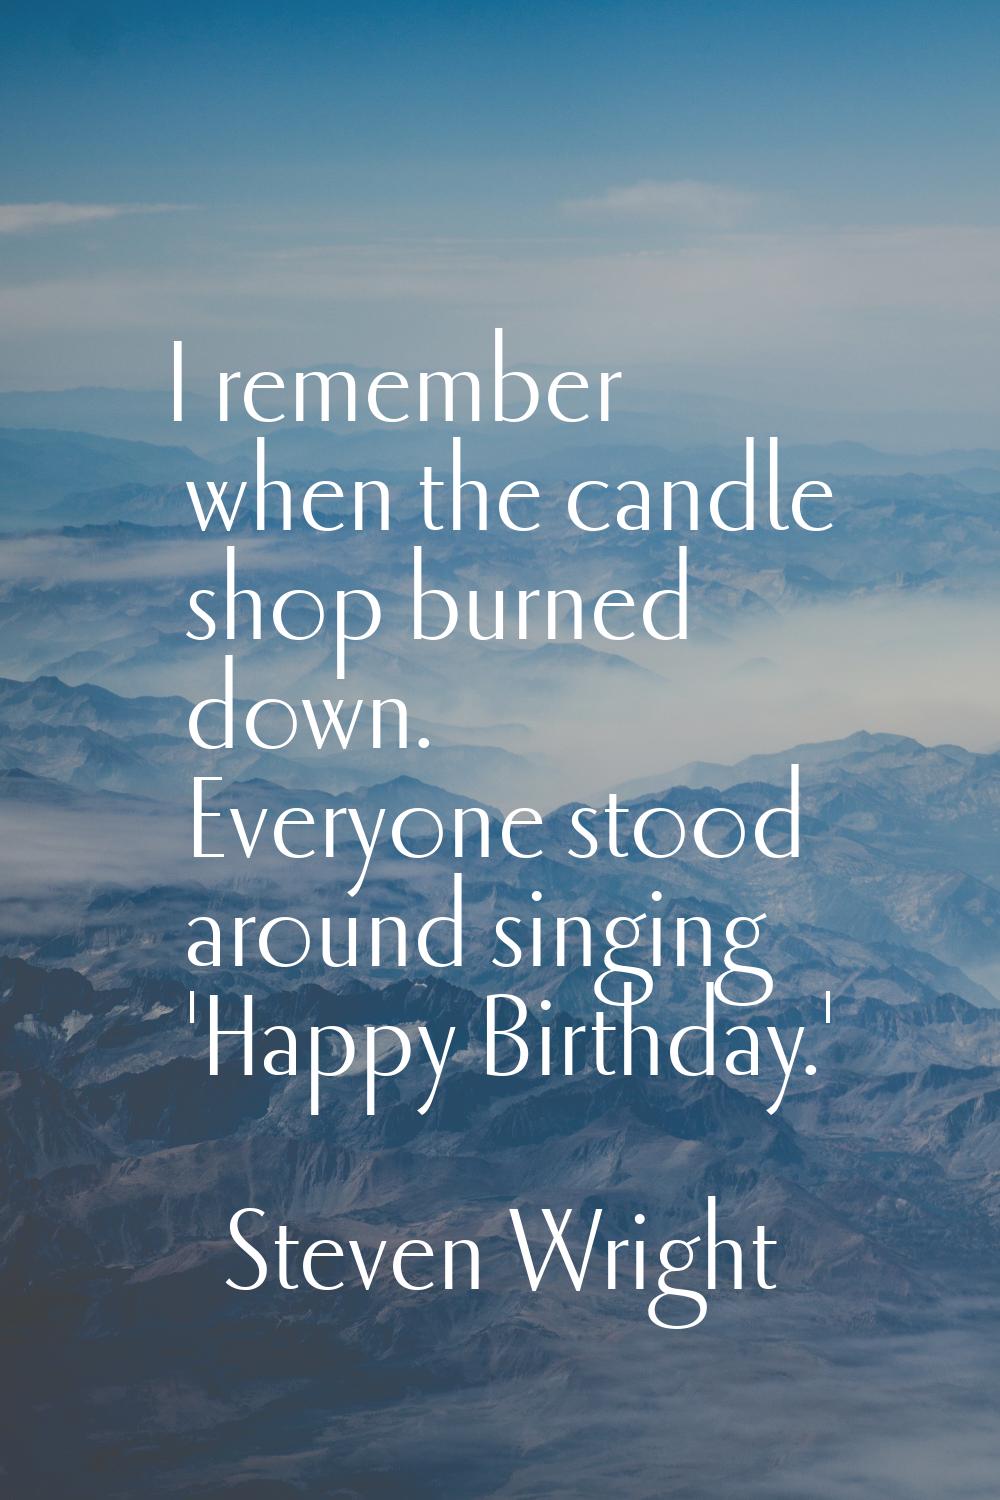 I remember when the candle shop burned down. Everyone stood around singing 'Happy Birthday.'